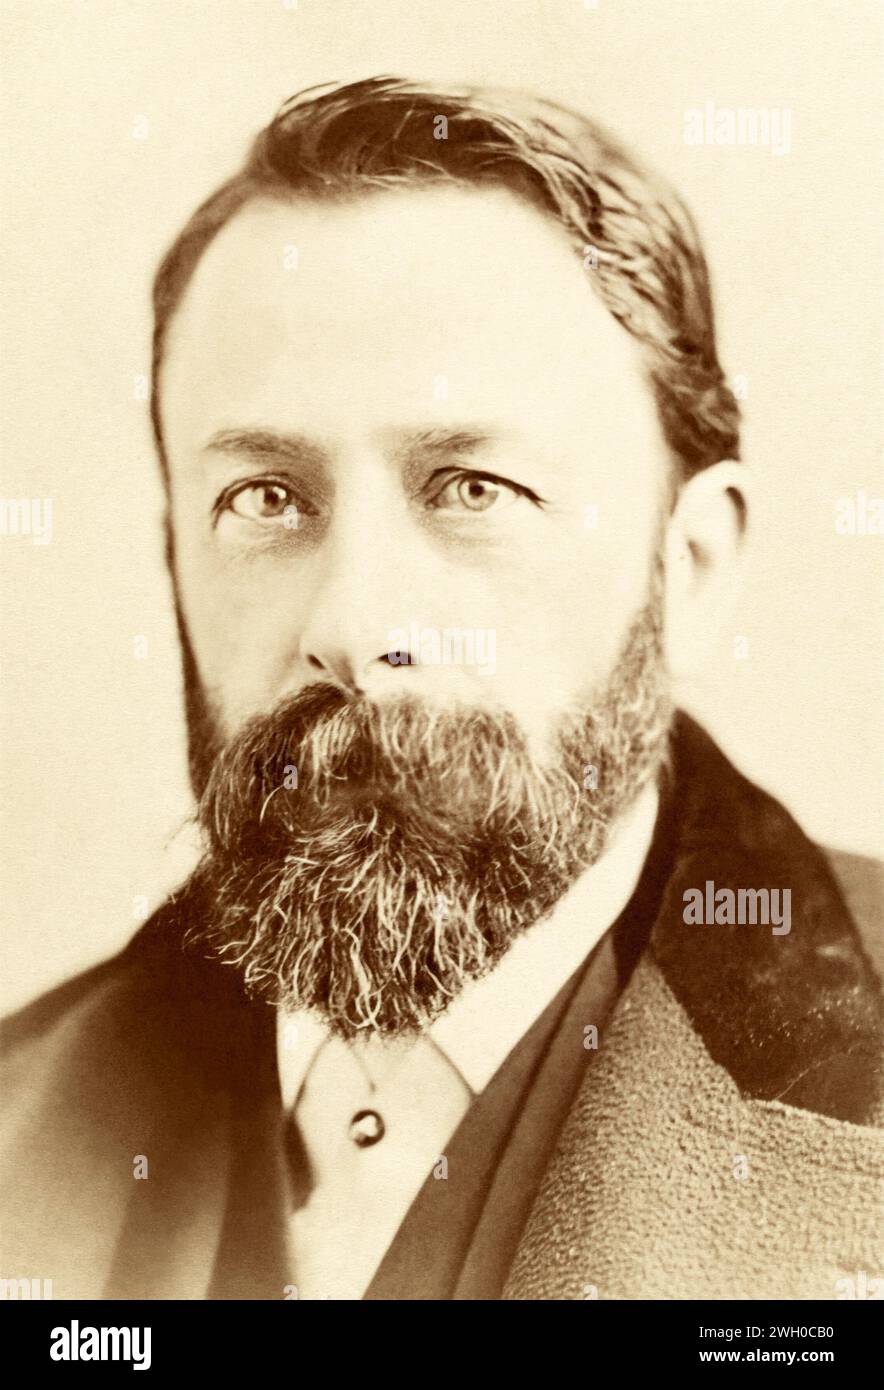 Albert Bierstadt (1830-1902), American landscape painter known for his landscape paintings of the American West, associated with the Hudson River School, in a portrait by Napoleon Sarony, c1870s. Stock Photo